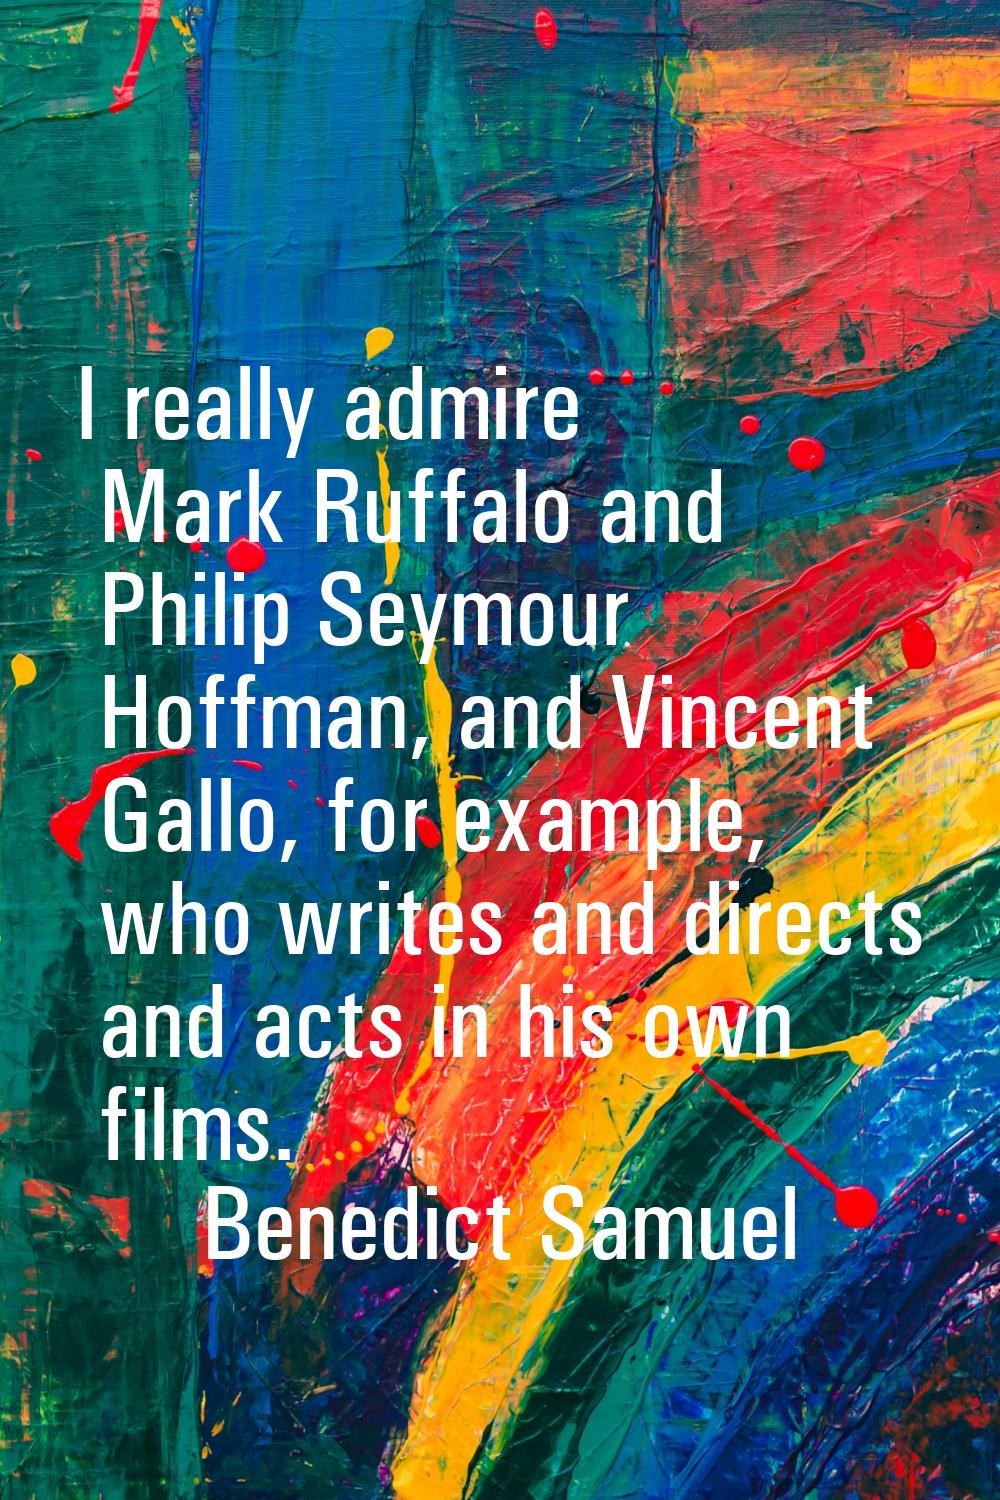 I really admire Mark Ruffalo and Philip Seymour Hoffman, and Vincent Gallo, for example, who writes